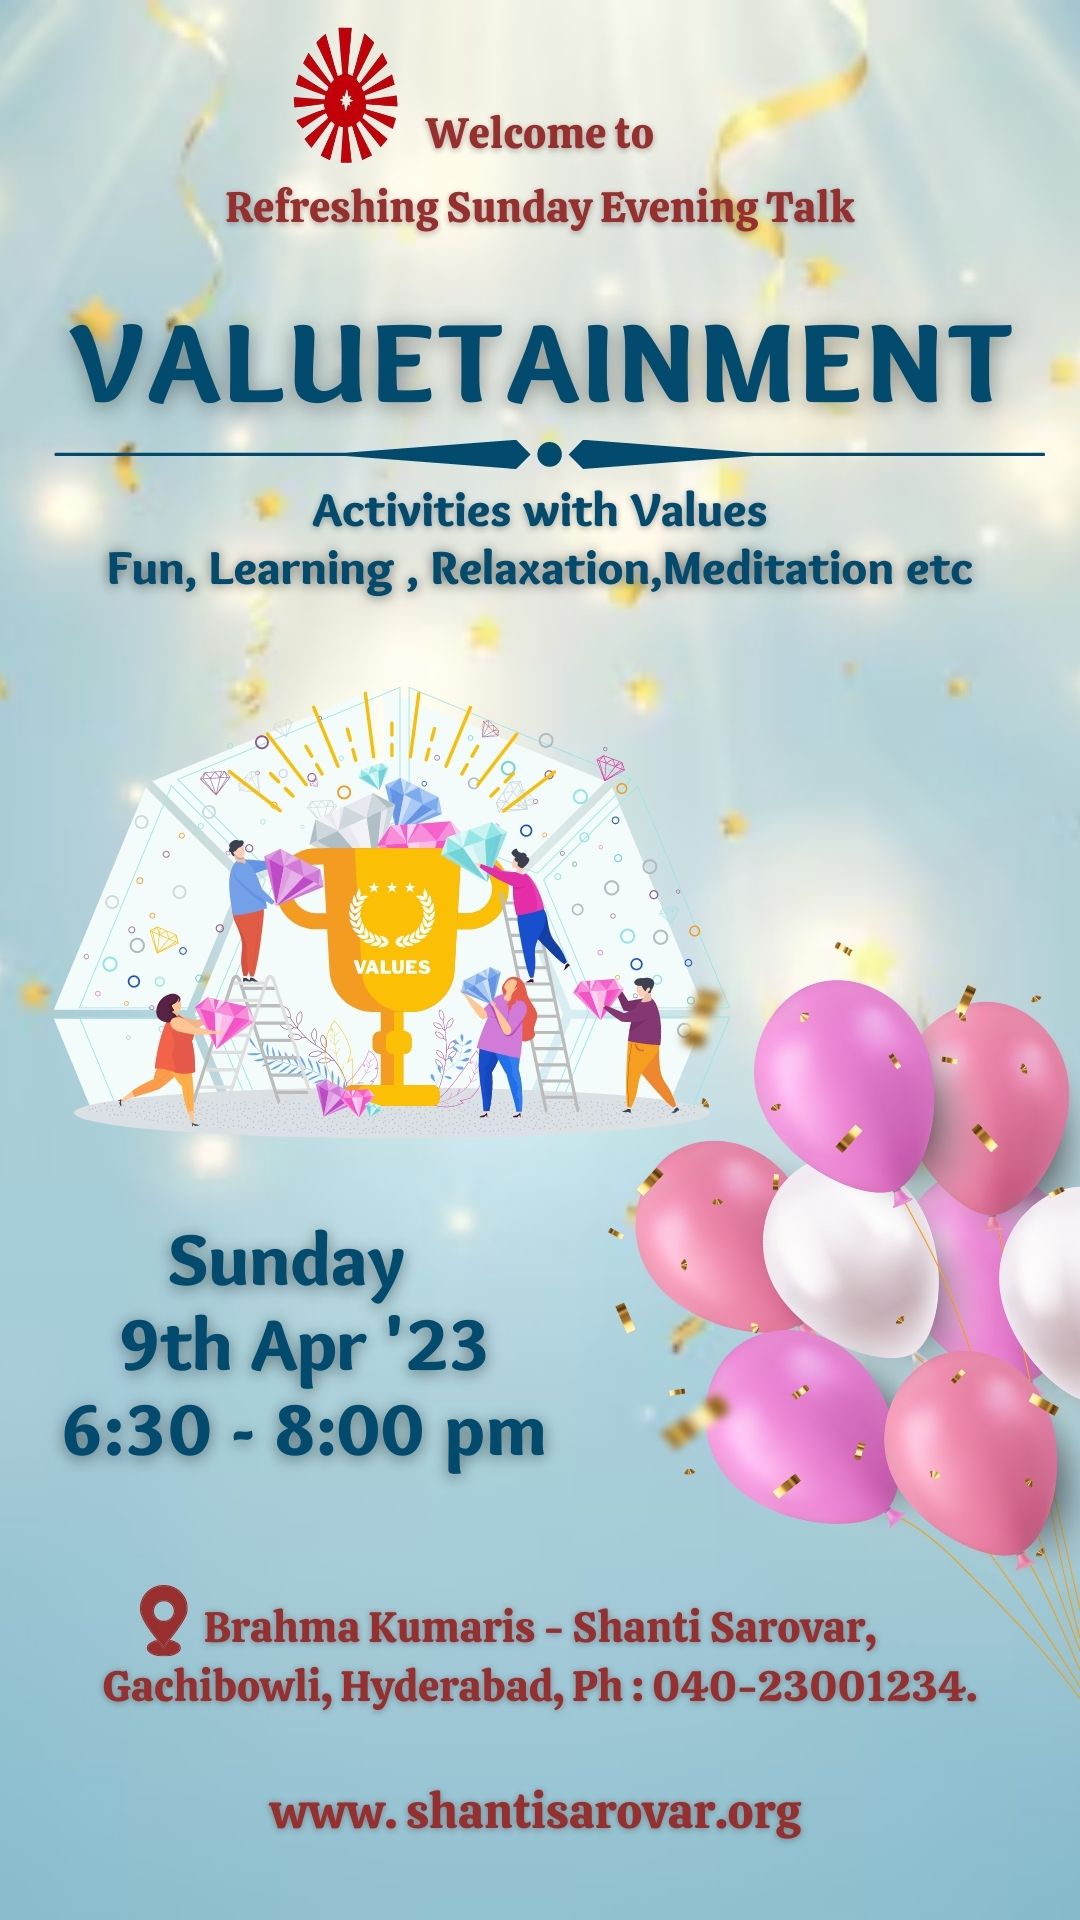 Valuetainment – activities with values fun, learning, relaxation, meditation etc